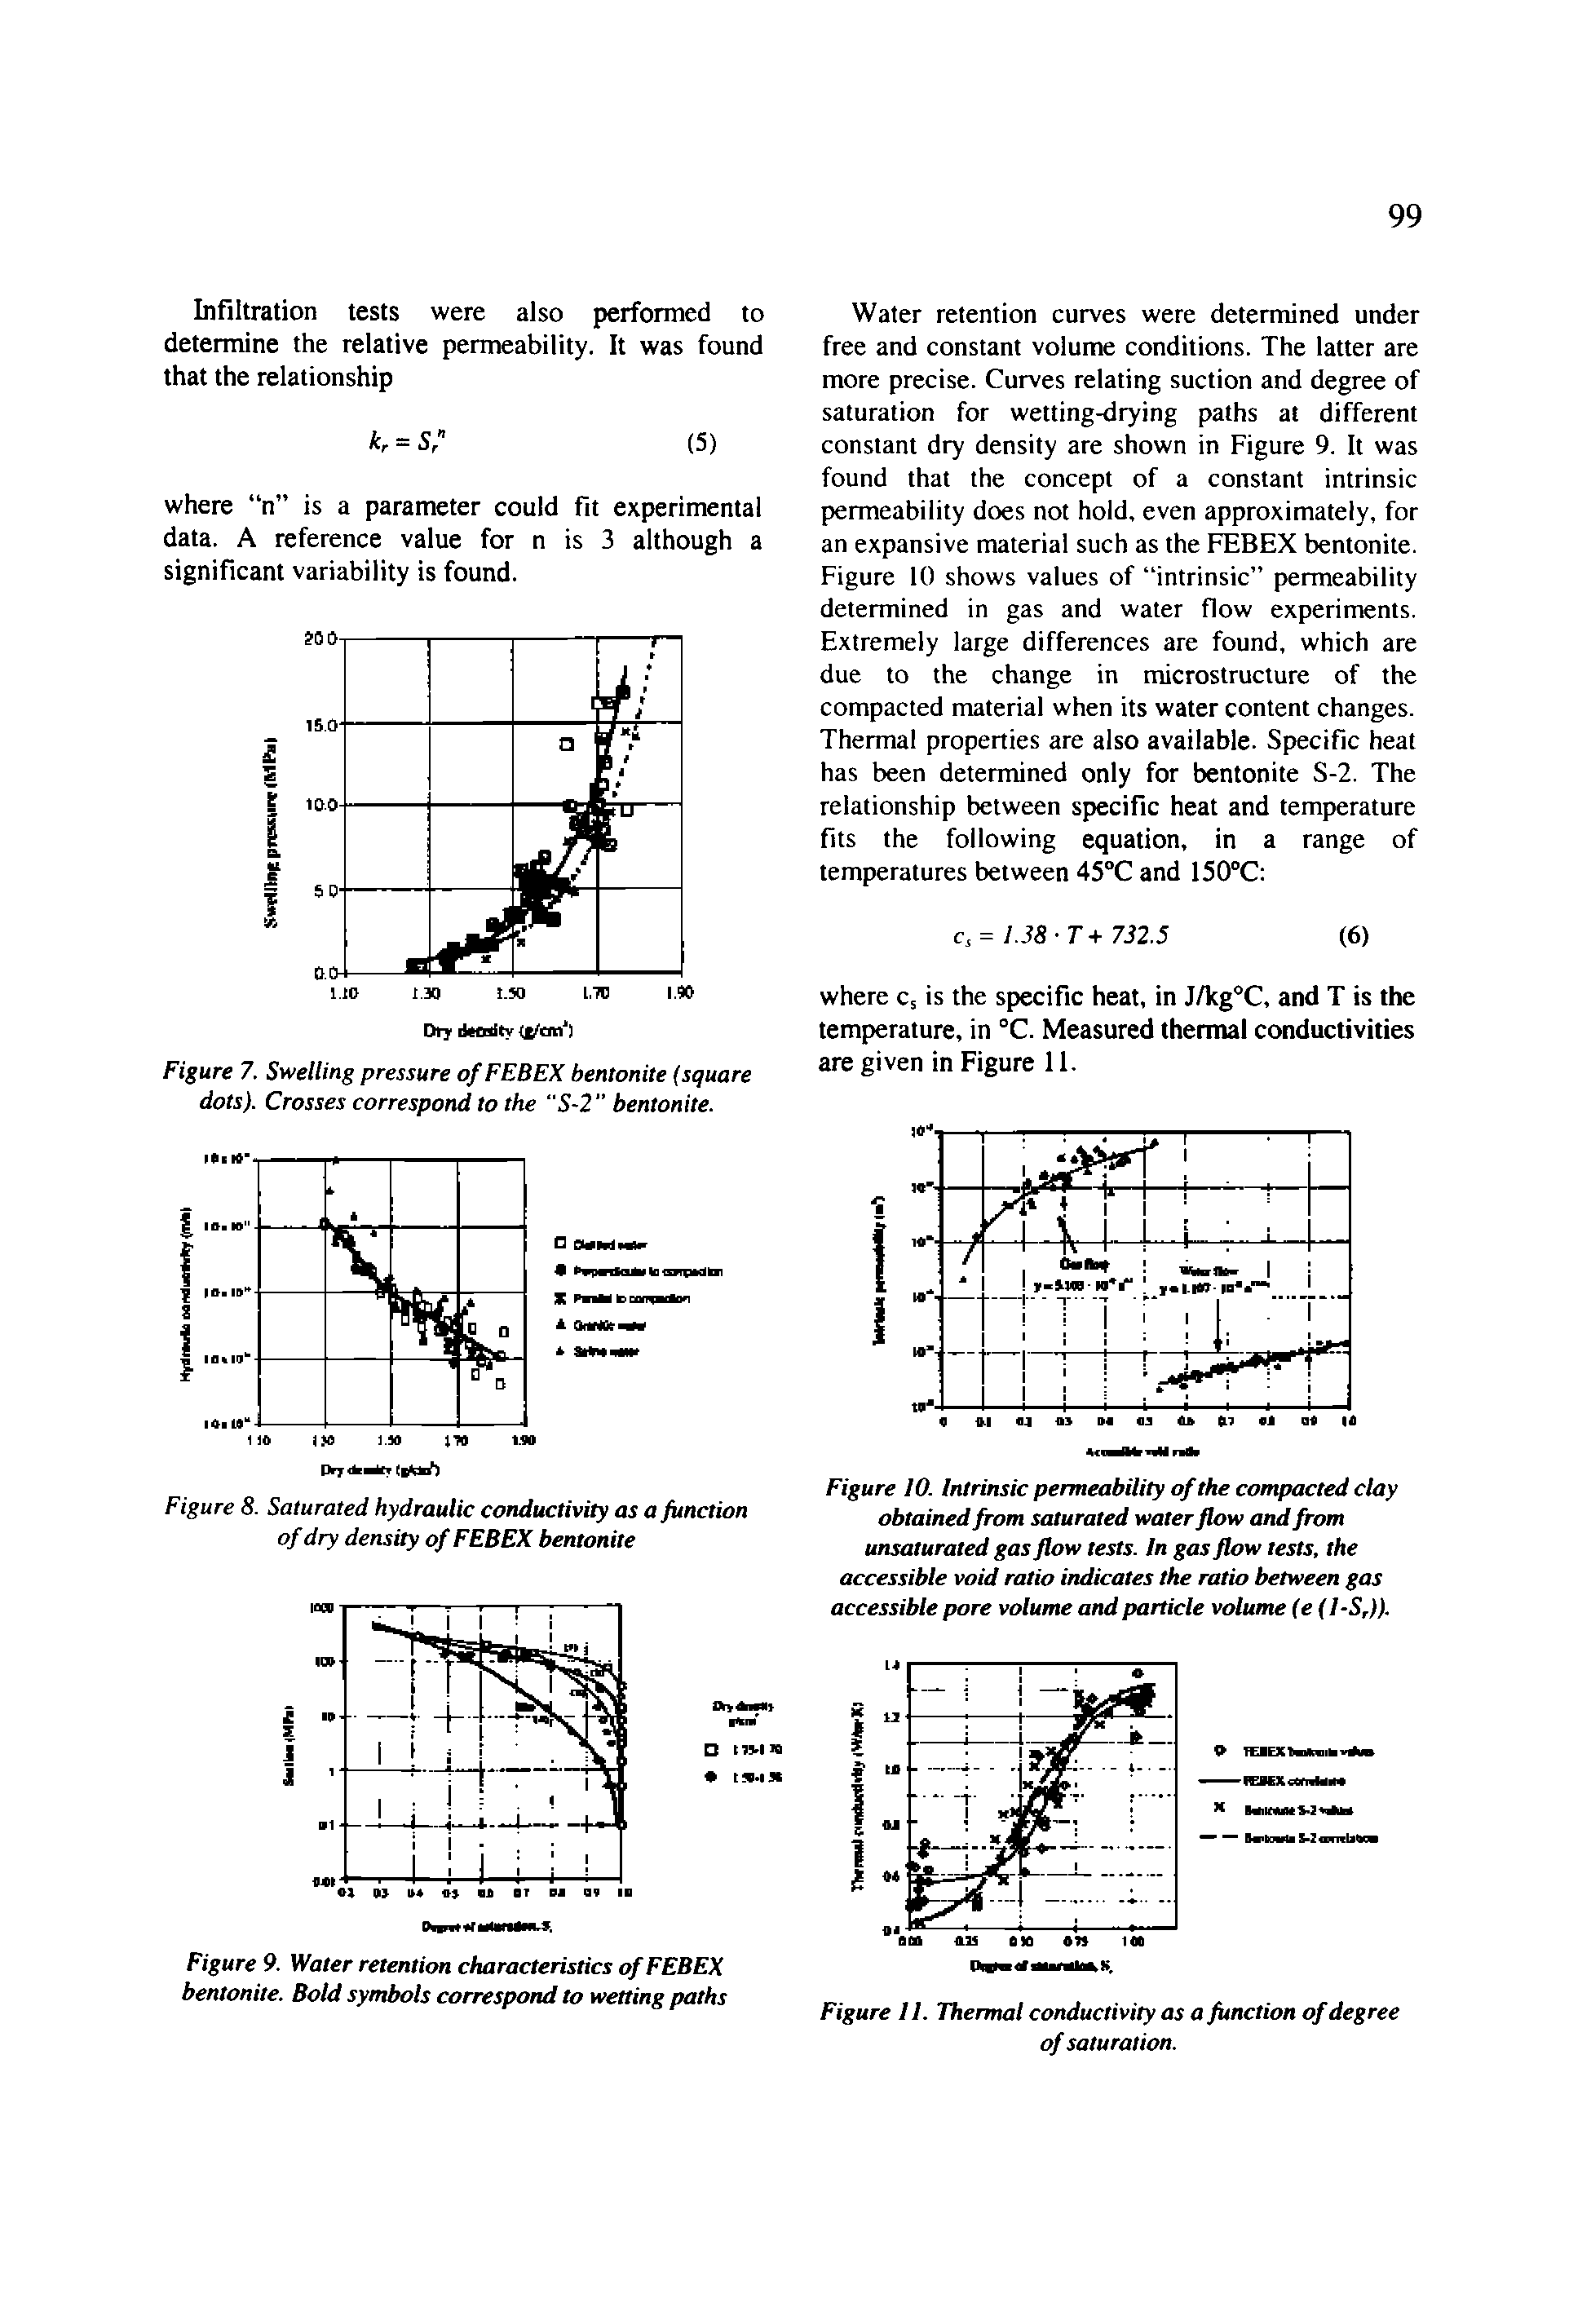 Figure 10. Intrinsic permeability of the compacted clay obtained from saturated water flow and from unsaturated gas flow tests. In gas flow tests, the accessible void ratio indicates the ratio between gas accessible pore volume and particle volume (e( l-S,)).